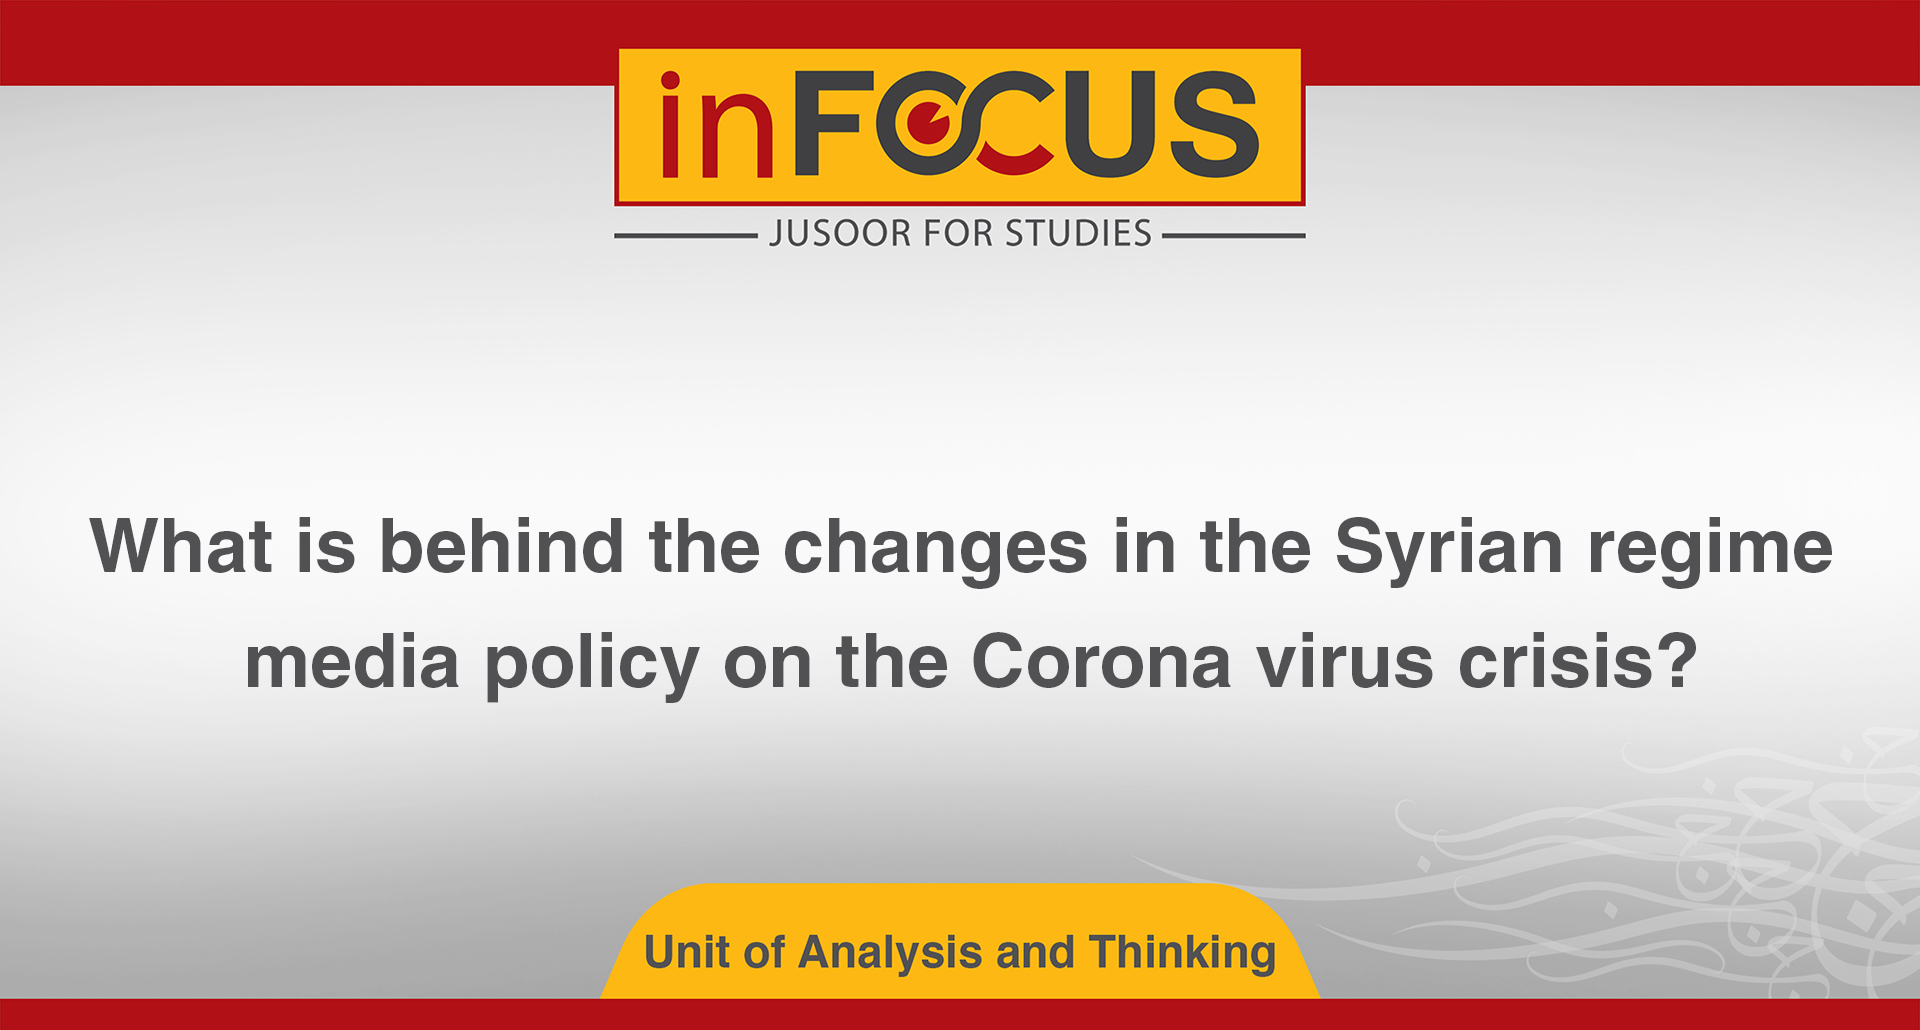 What is behind the changes in the Syrian regime media policy on the Corona virus crisis?